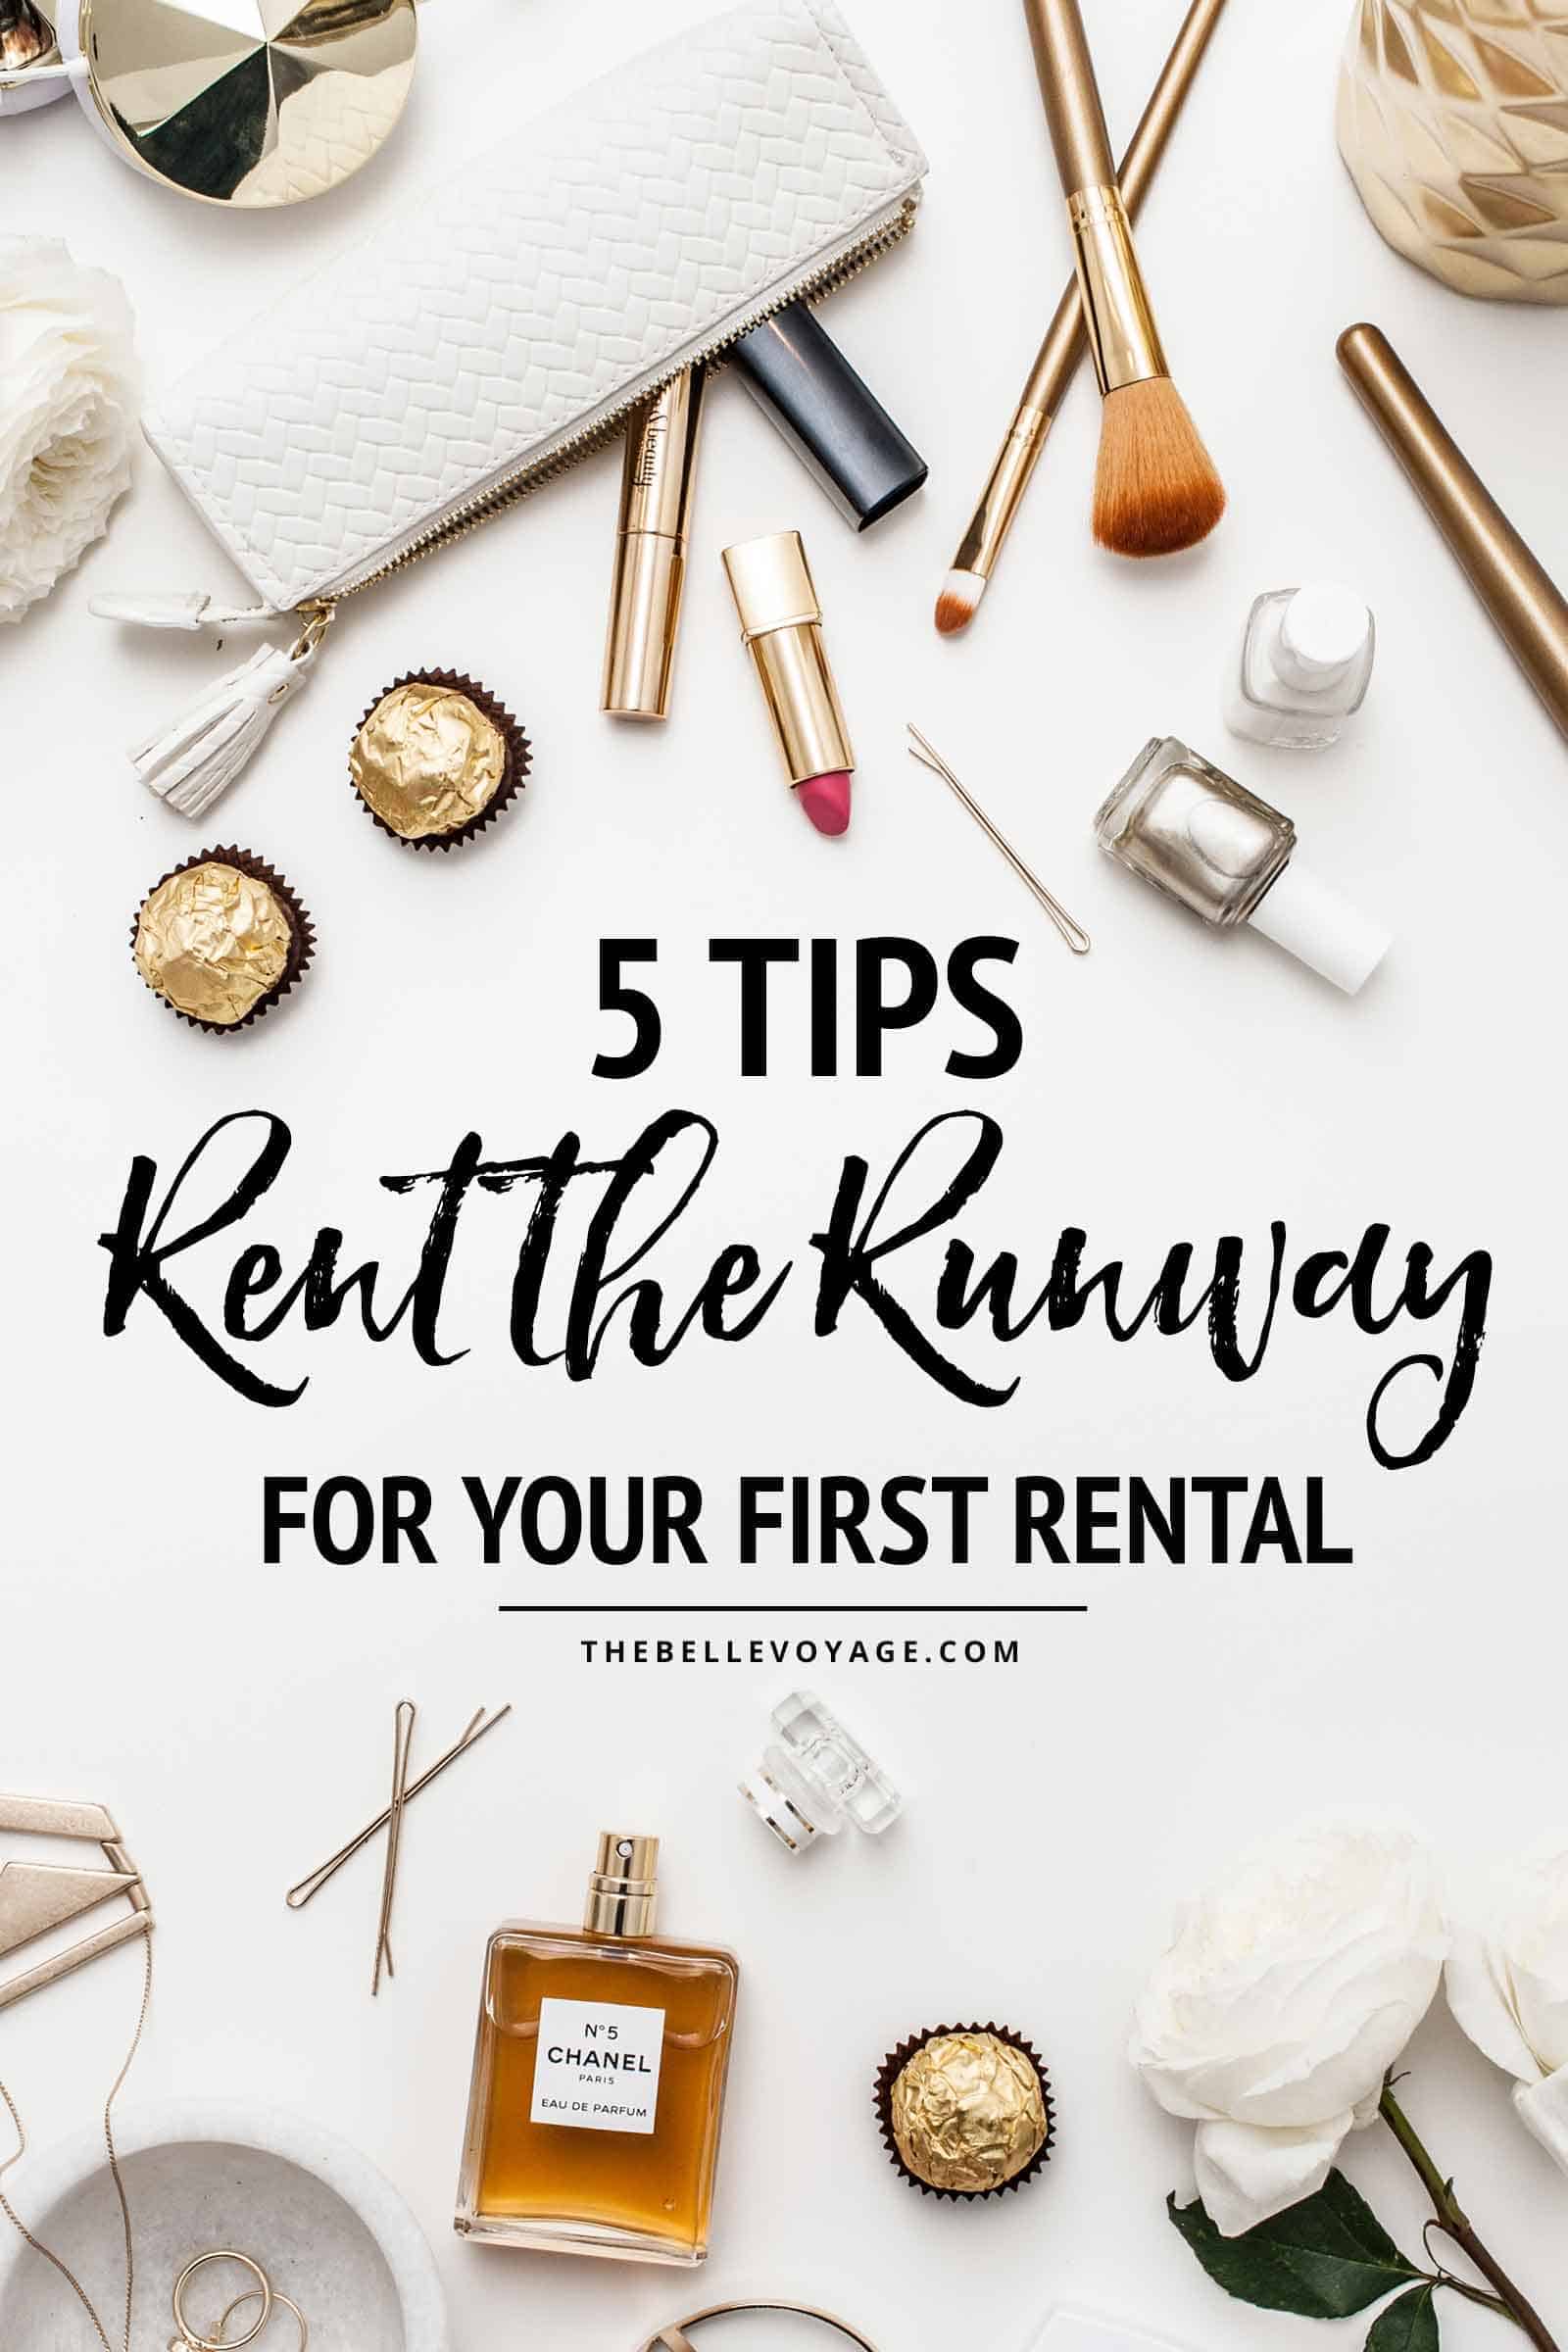 rent the runway review